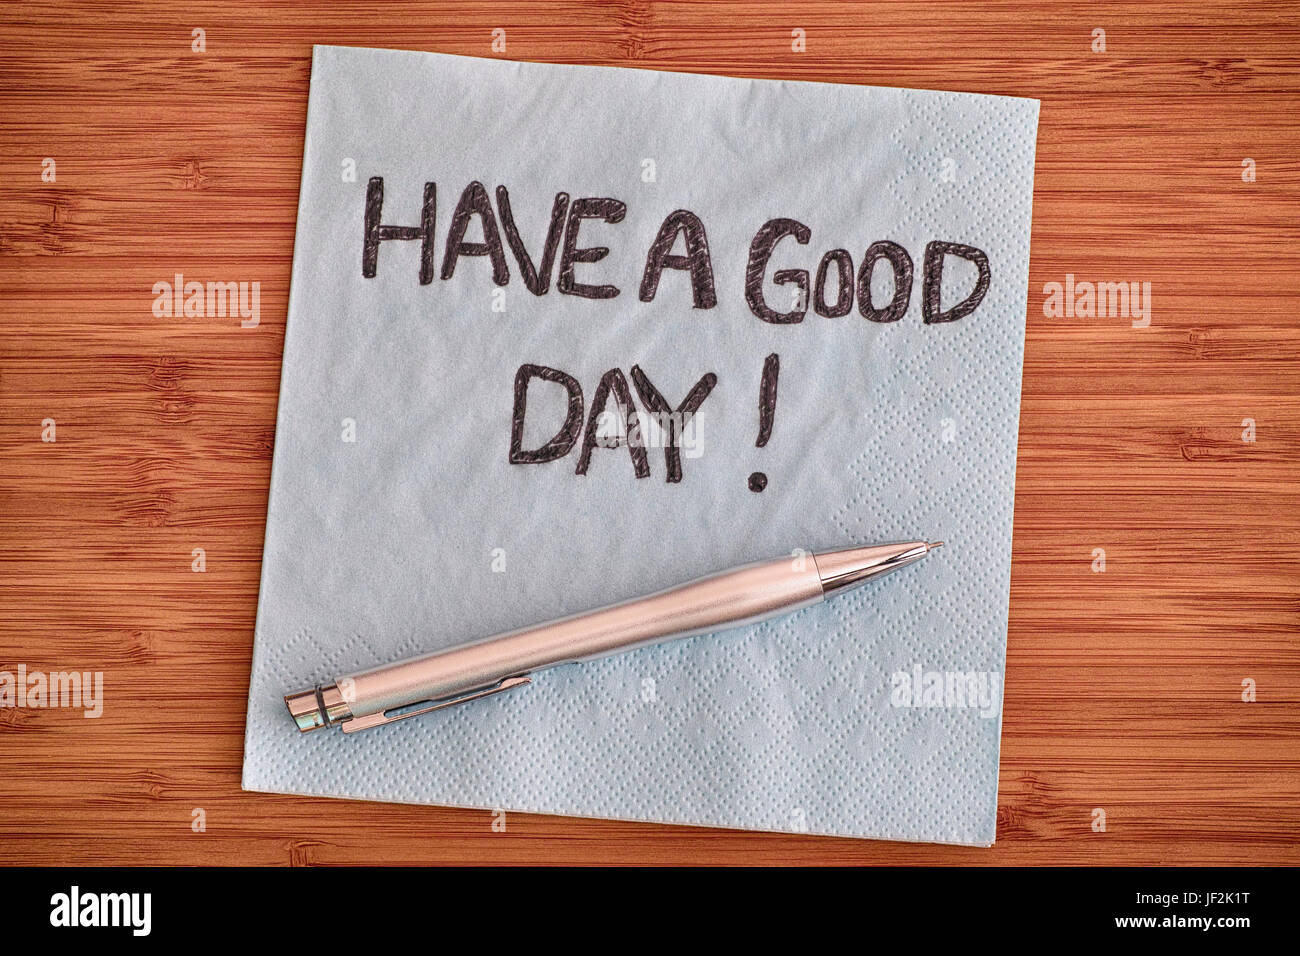 Have a good day! Handwriting on a napkin. Close up. Stock Photo